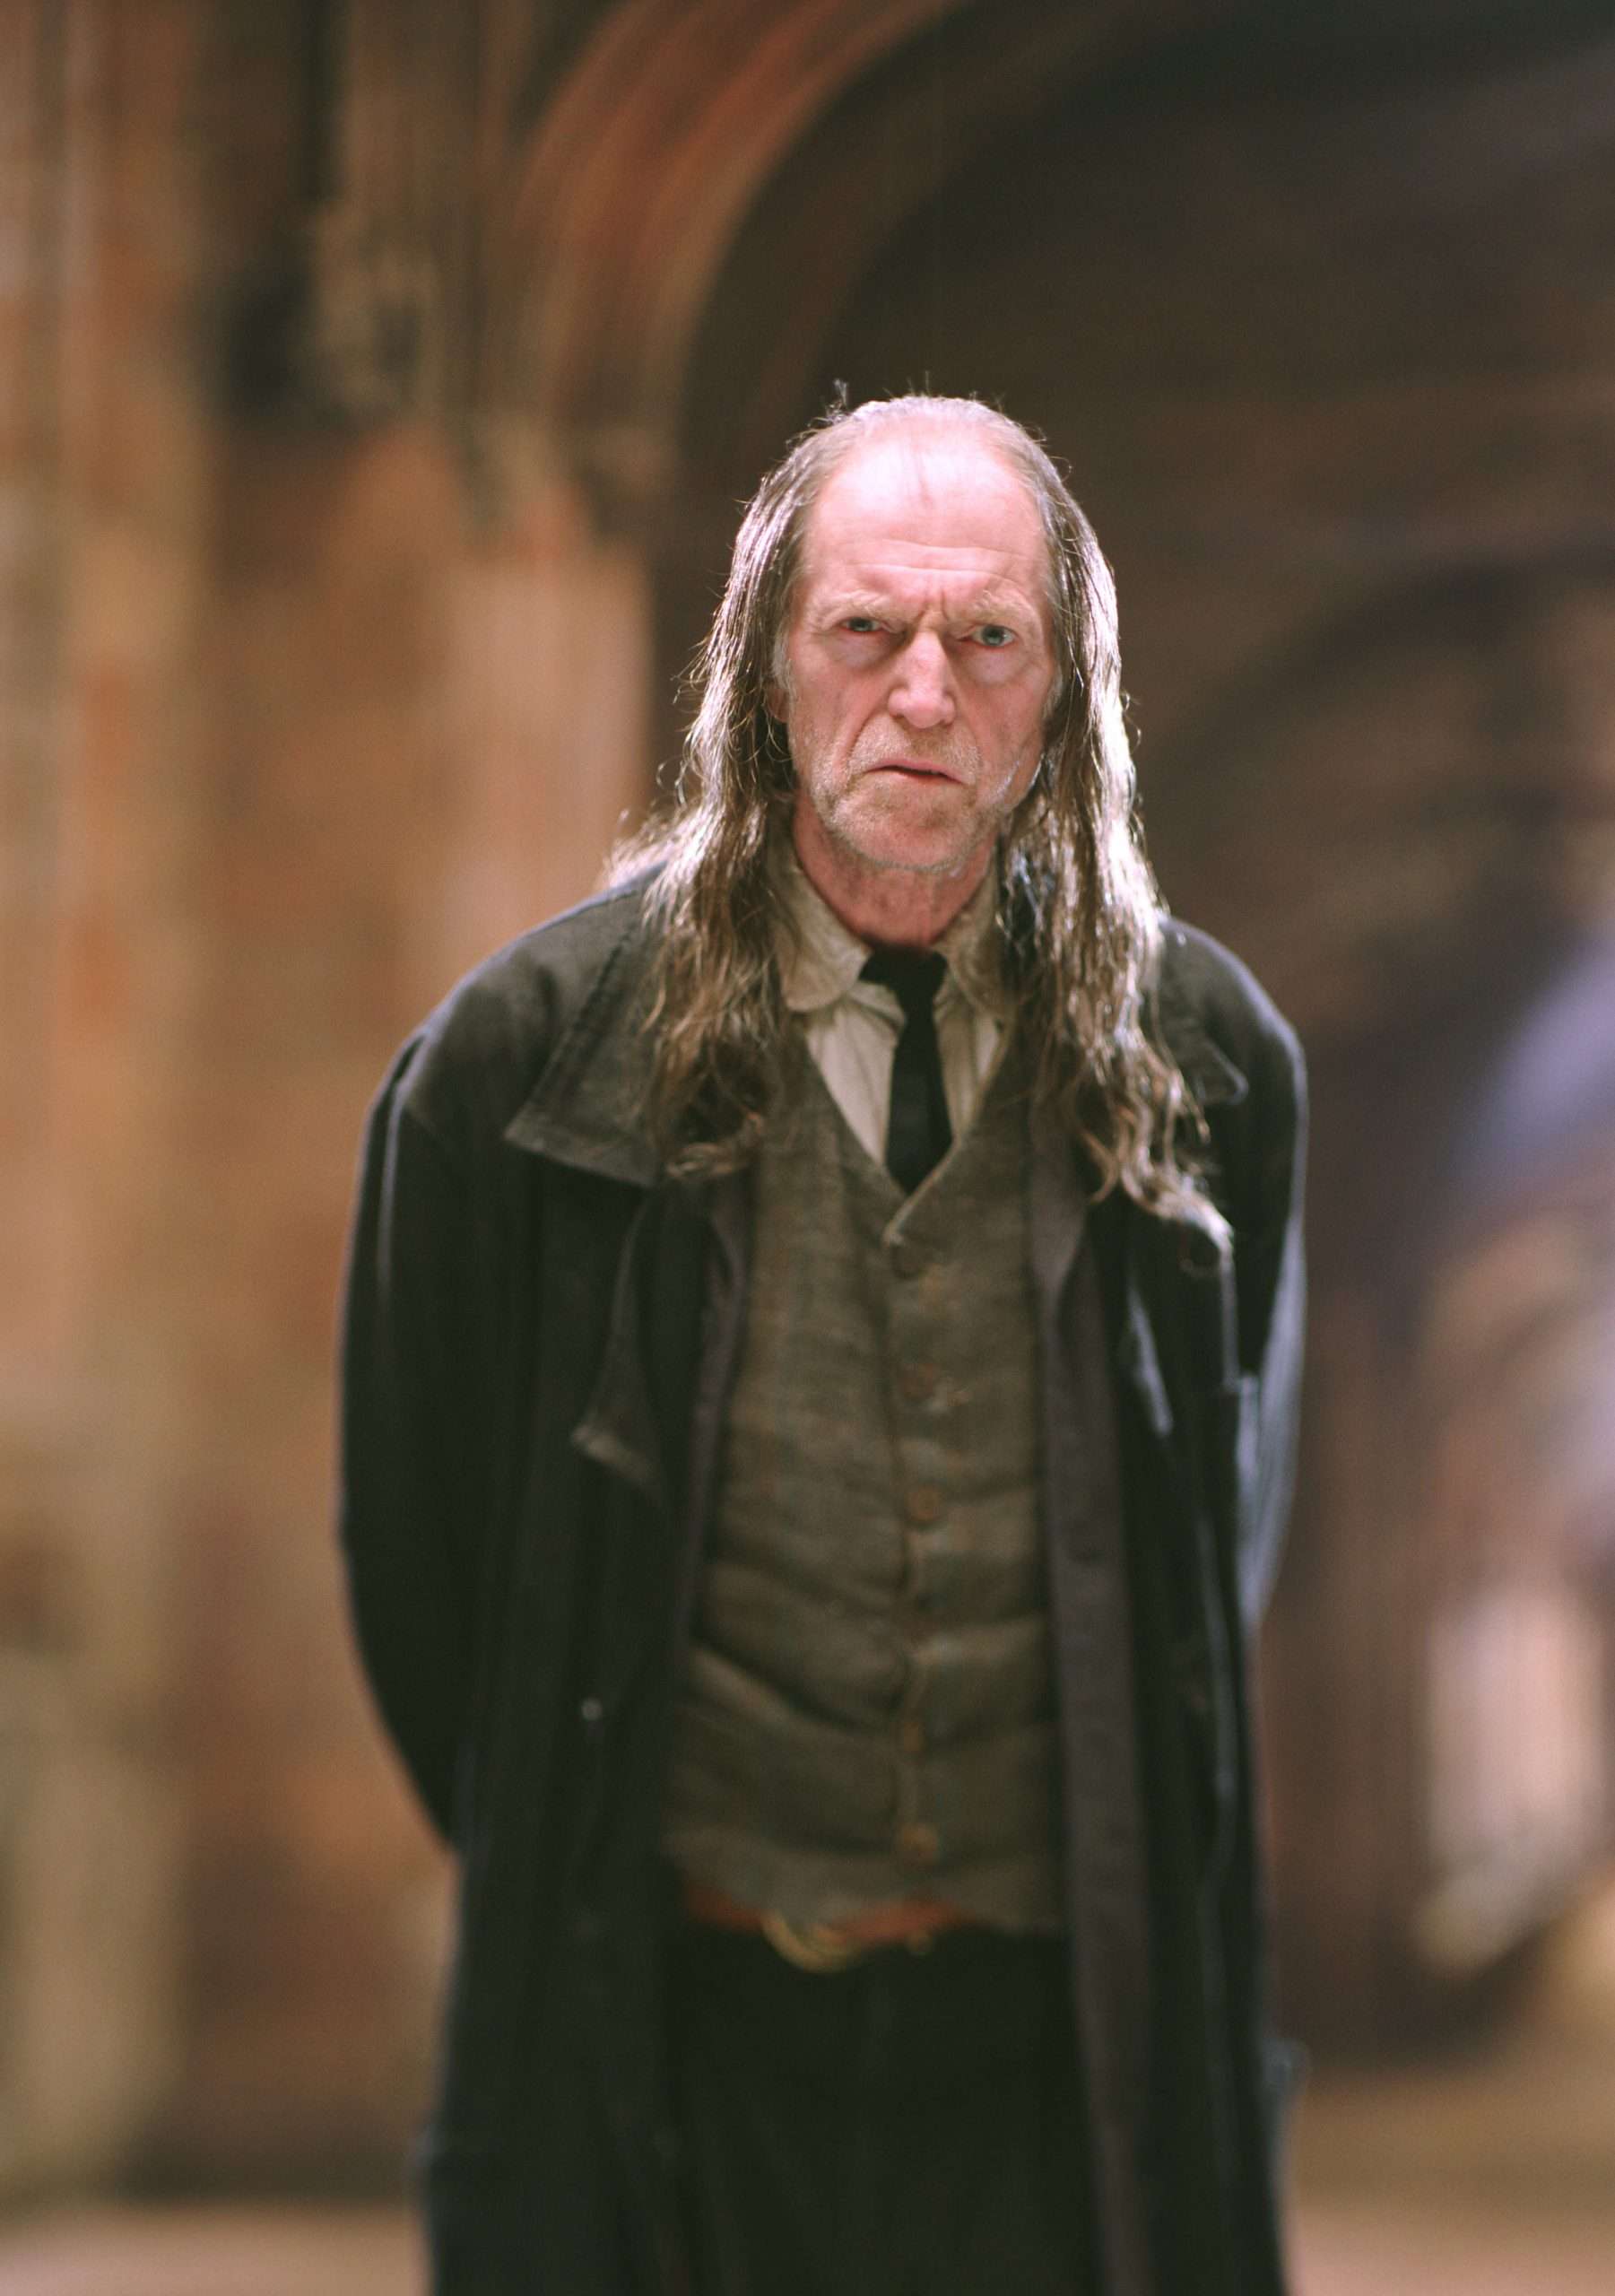 In defence of Argus Filch